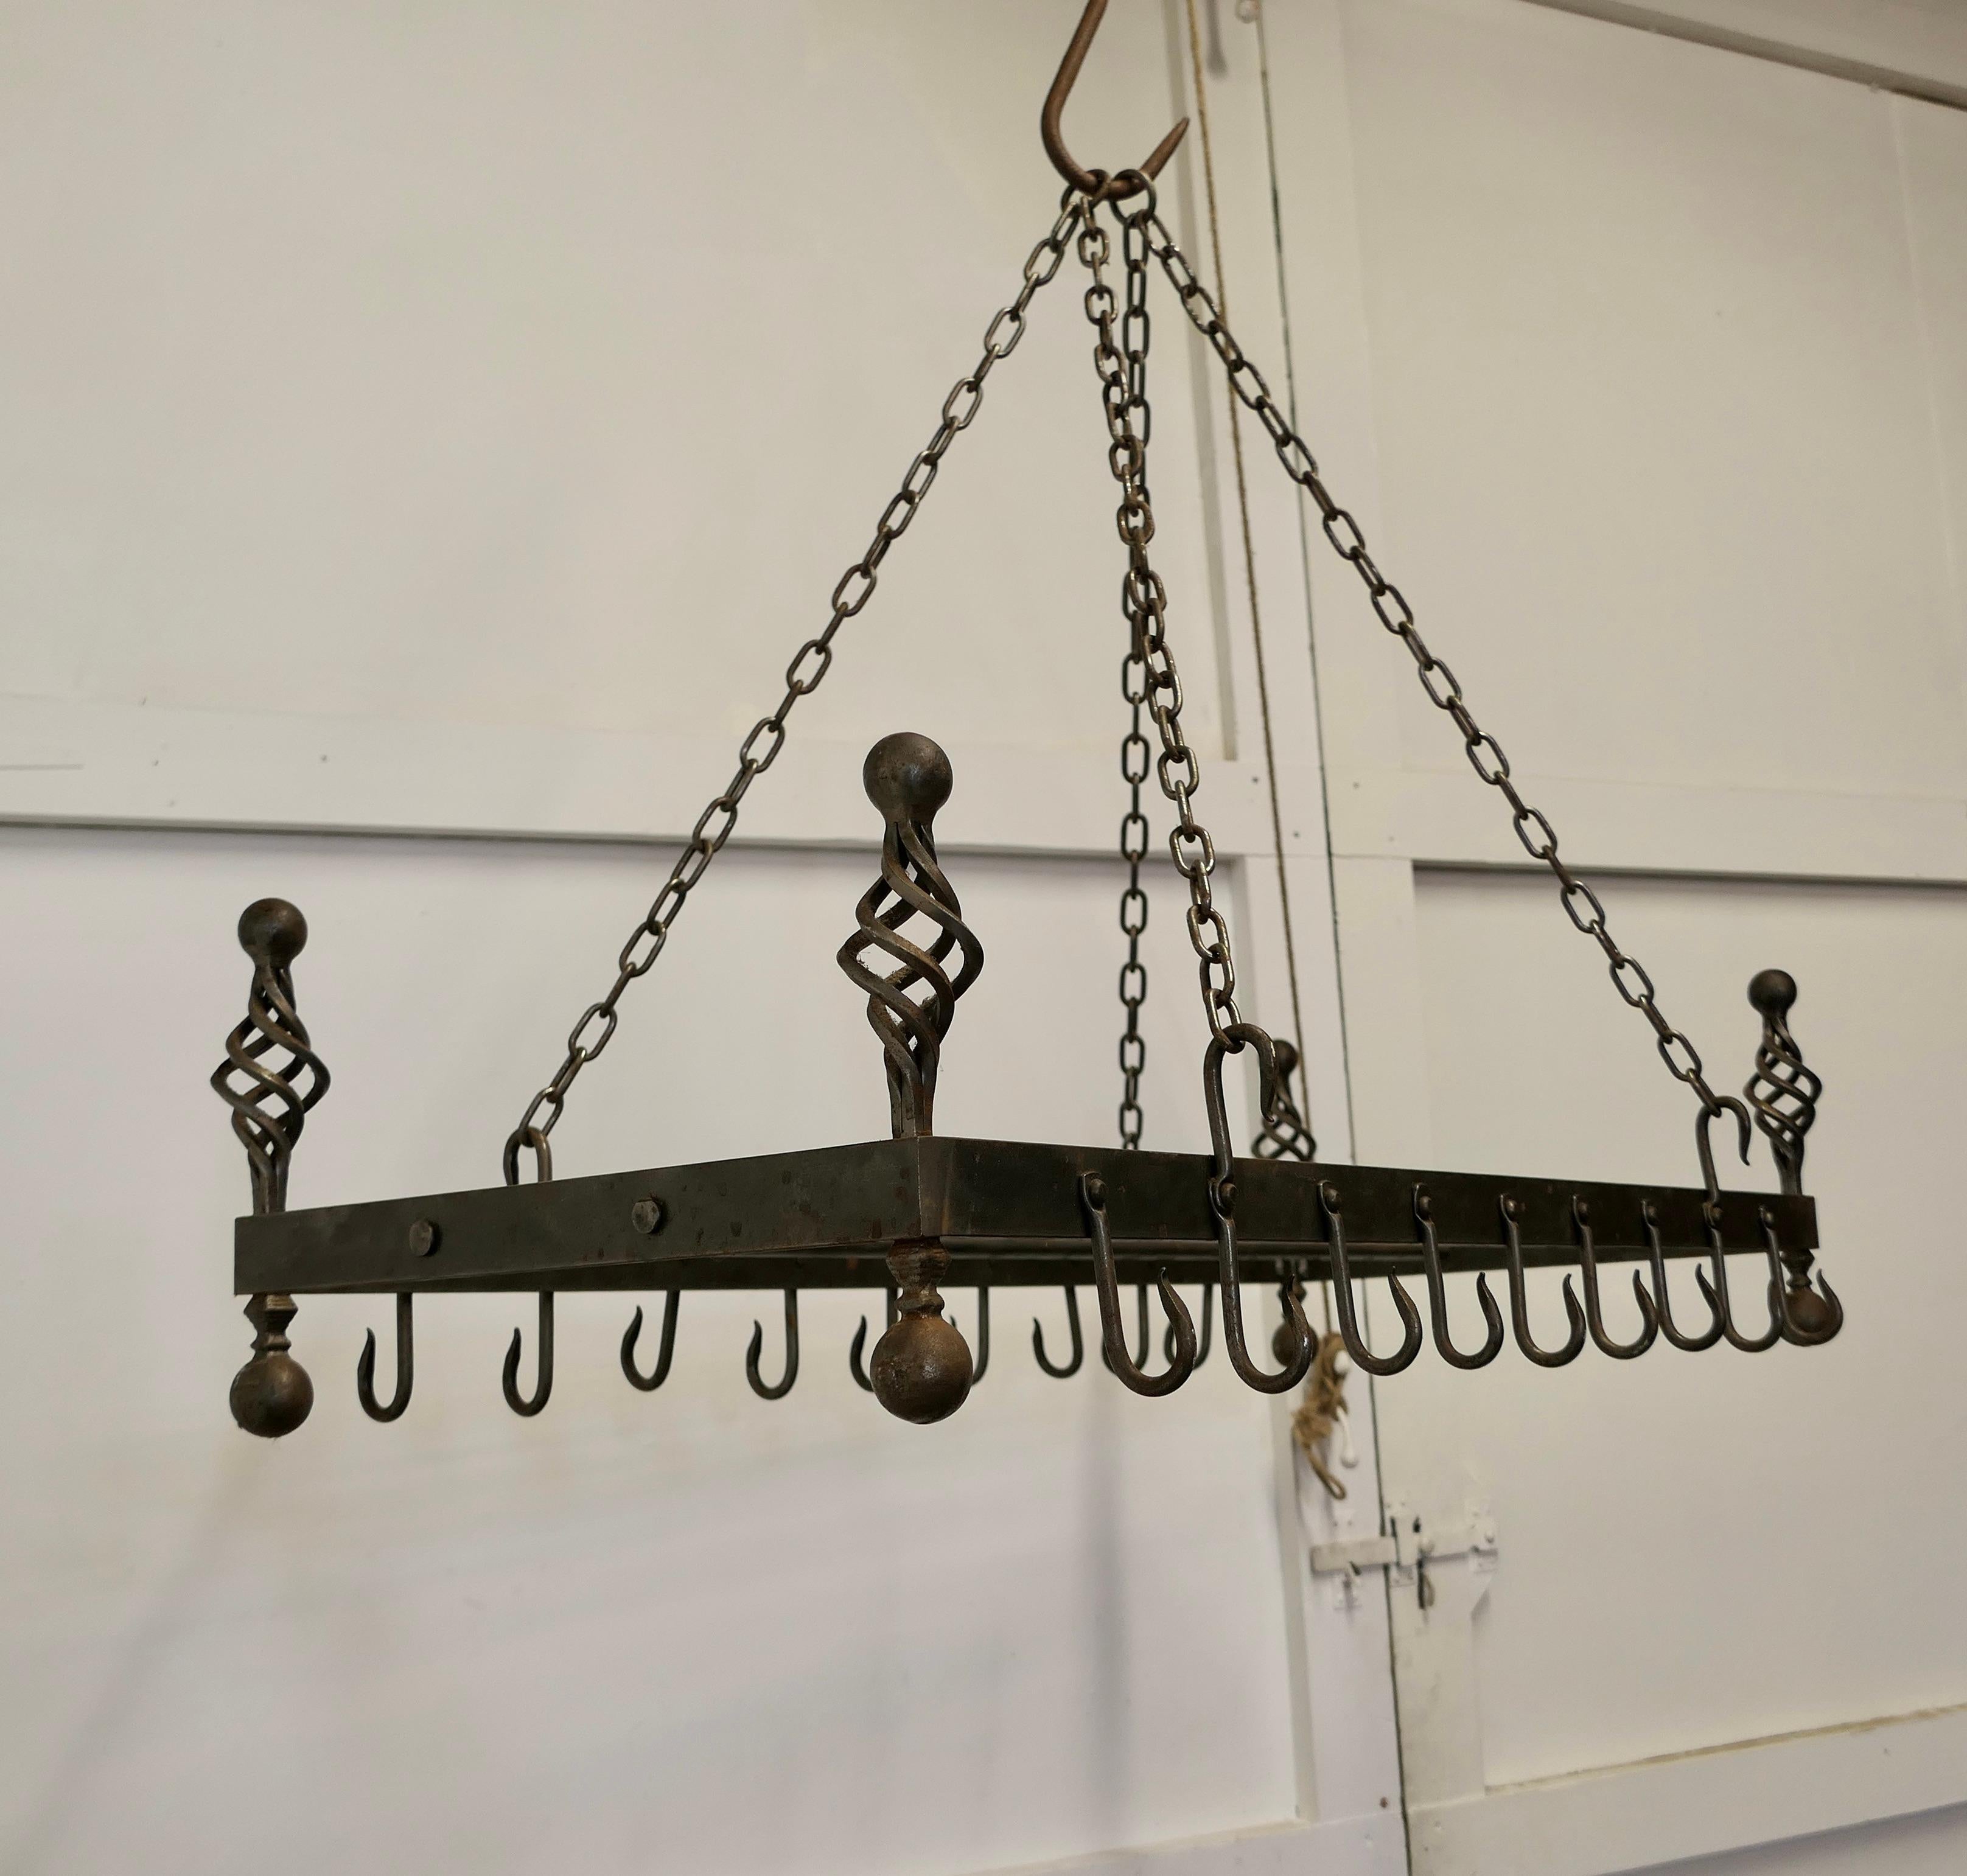 Blacksmith Made Iron Game Hanger, Kitchen Utensil or Pot Hanger In Good Condition For Sale In Chillerton, Isle of Wight